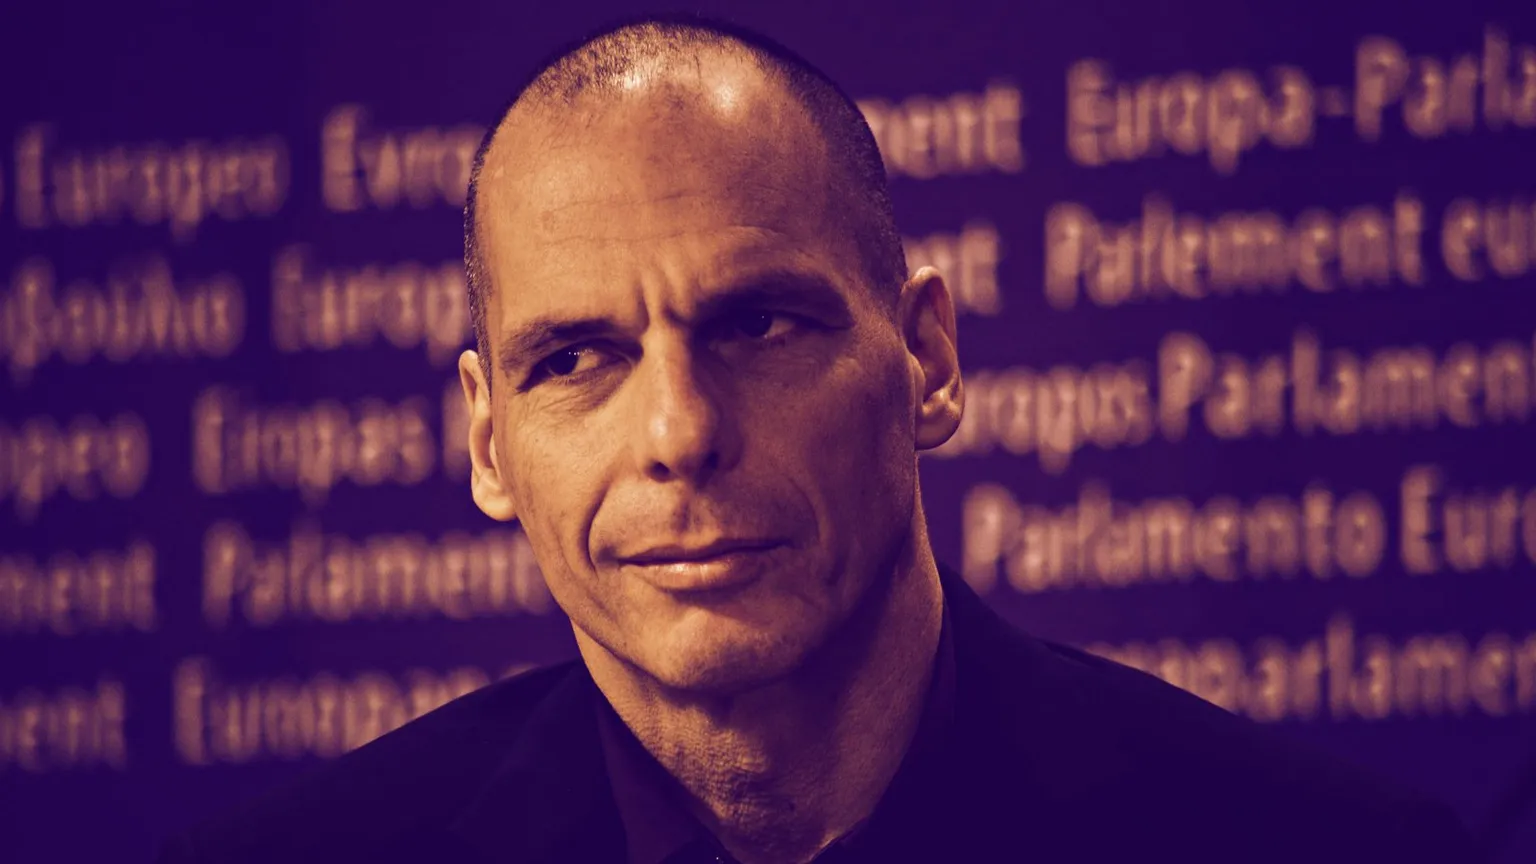 Replacing fiat with Bitcoin will only make “capitalism uglier, nastier and more dangerous for humanity,” said Varoufakis. Image: Shutterstock